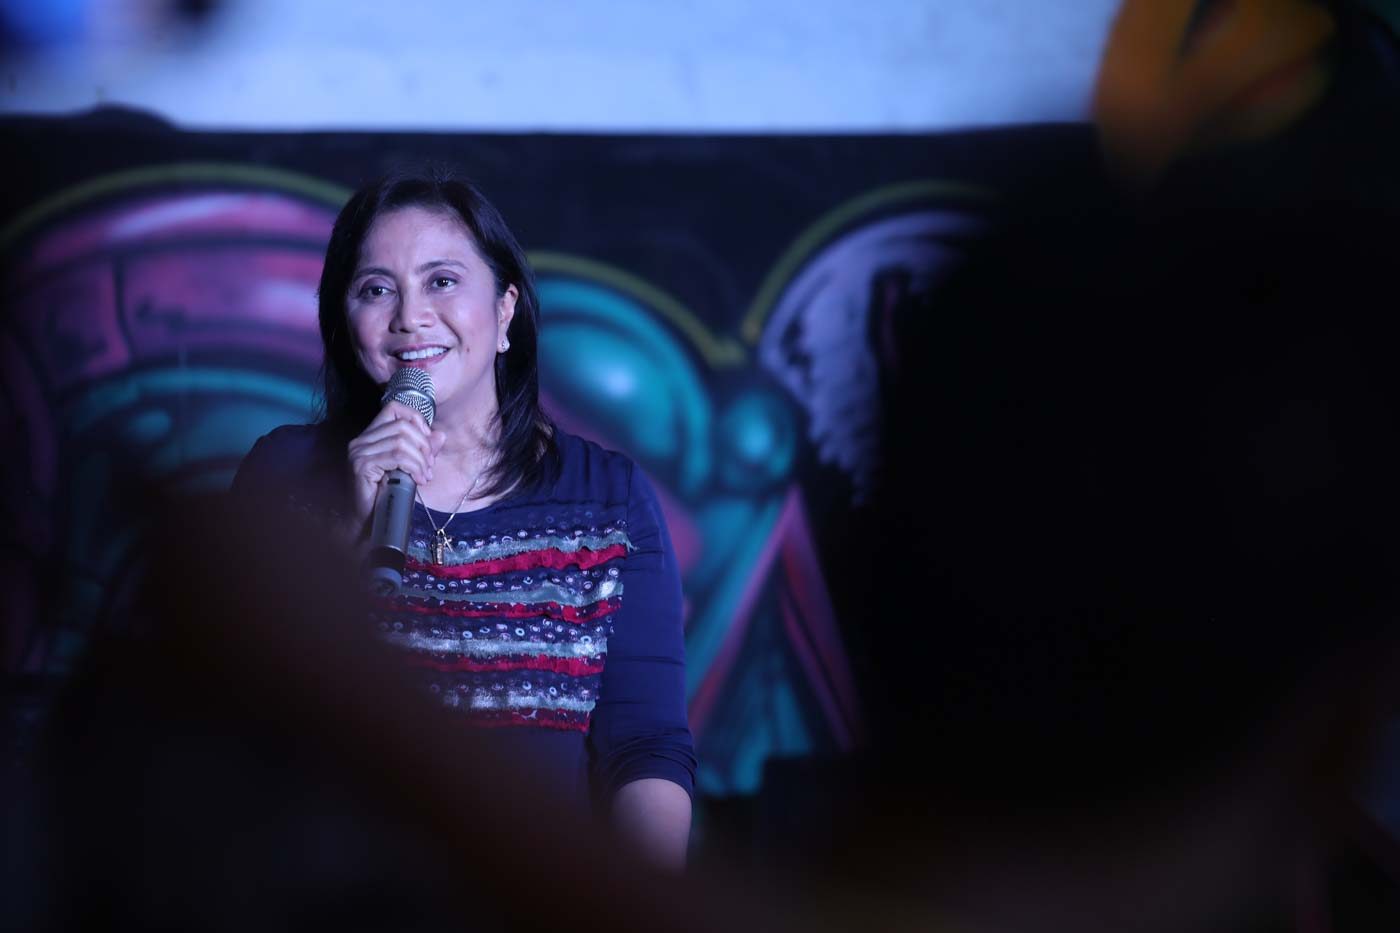 Robredo won’t dignify Locsin’s ‘rude’ remark against her